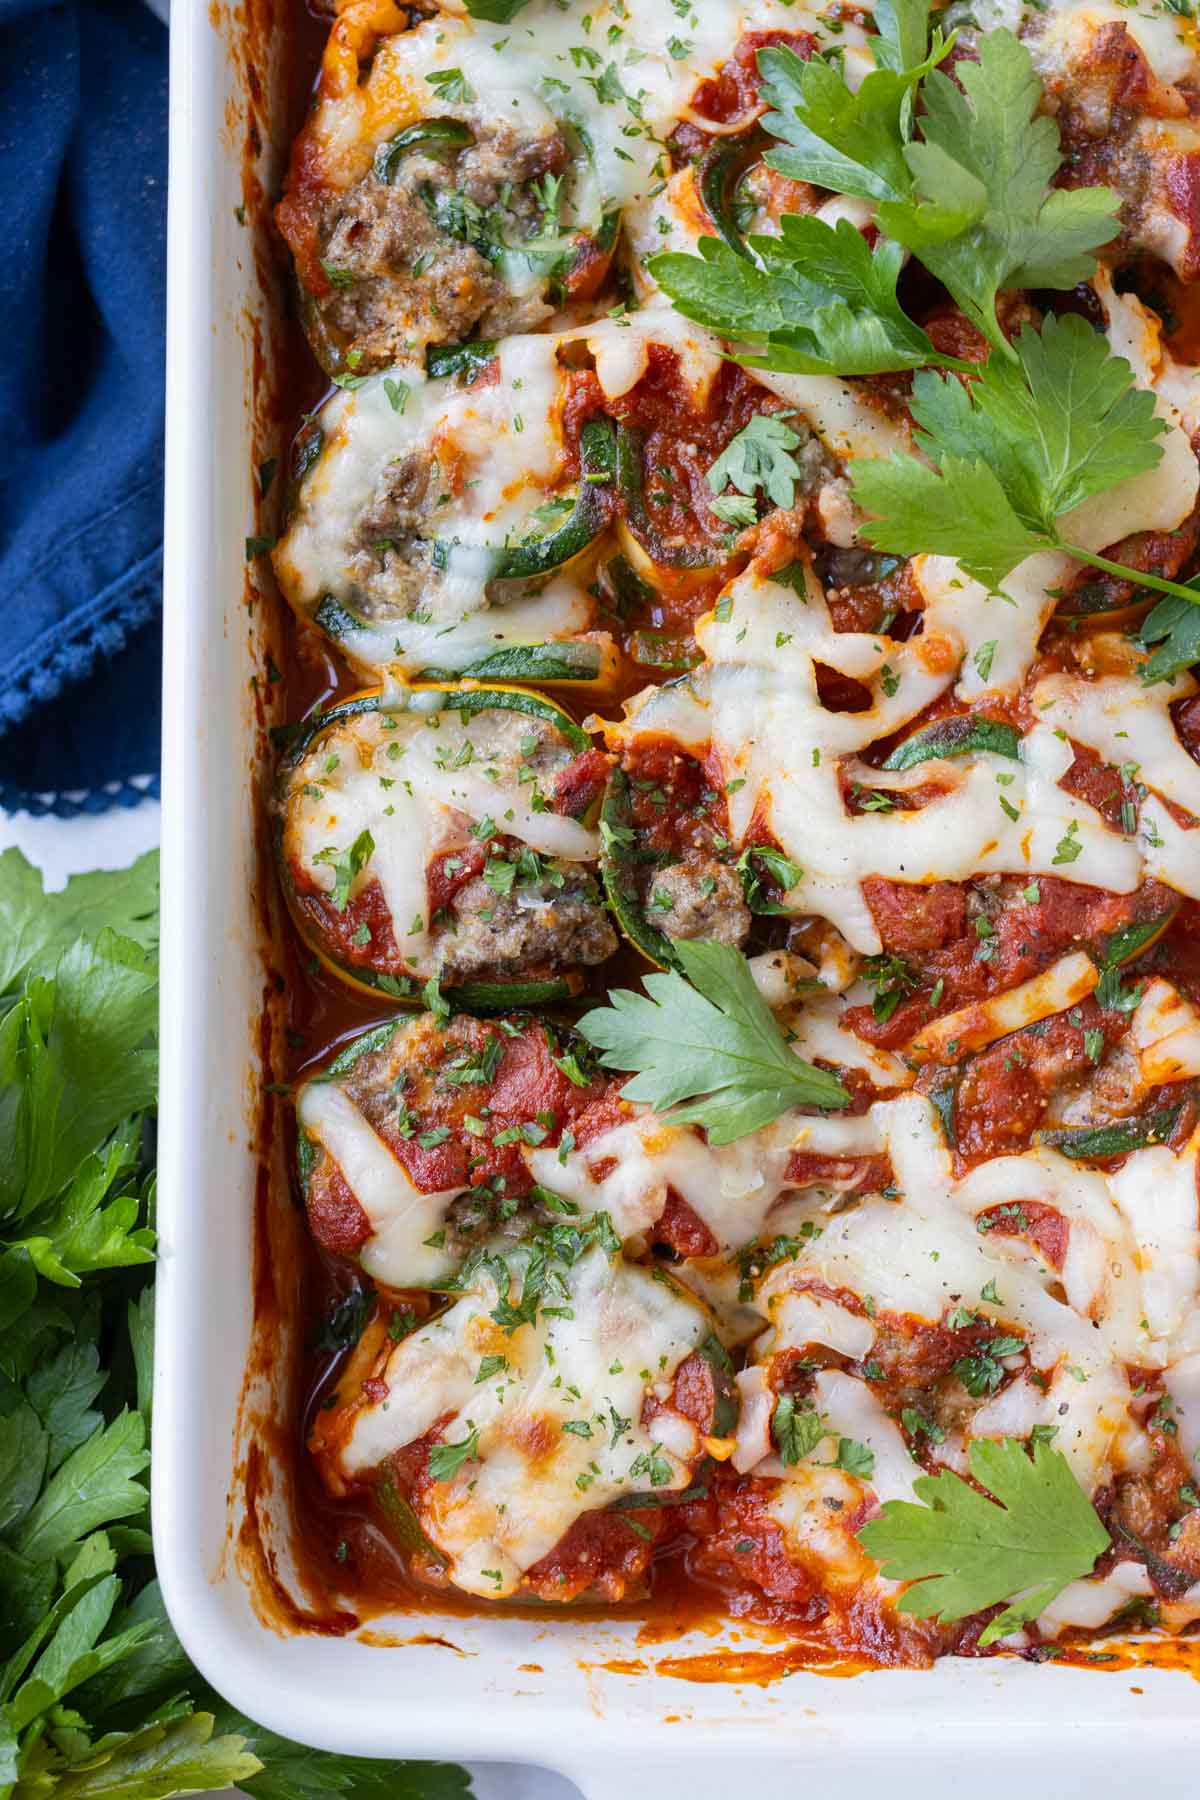 Easy zucchini lasagna roll-ups in red sauce garnished with herbs.